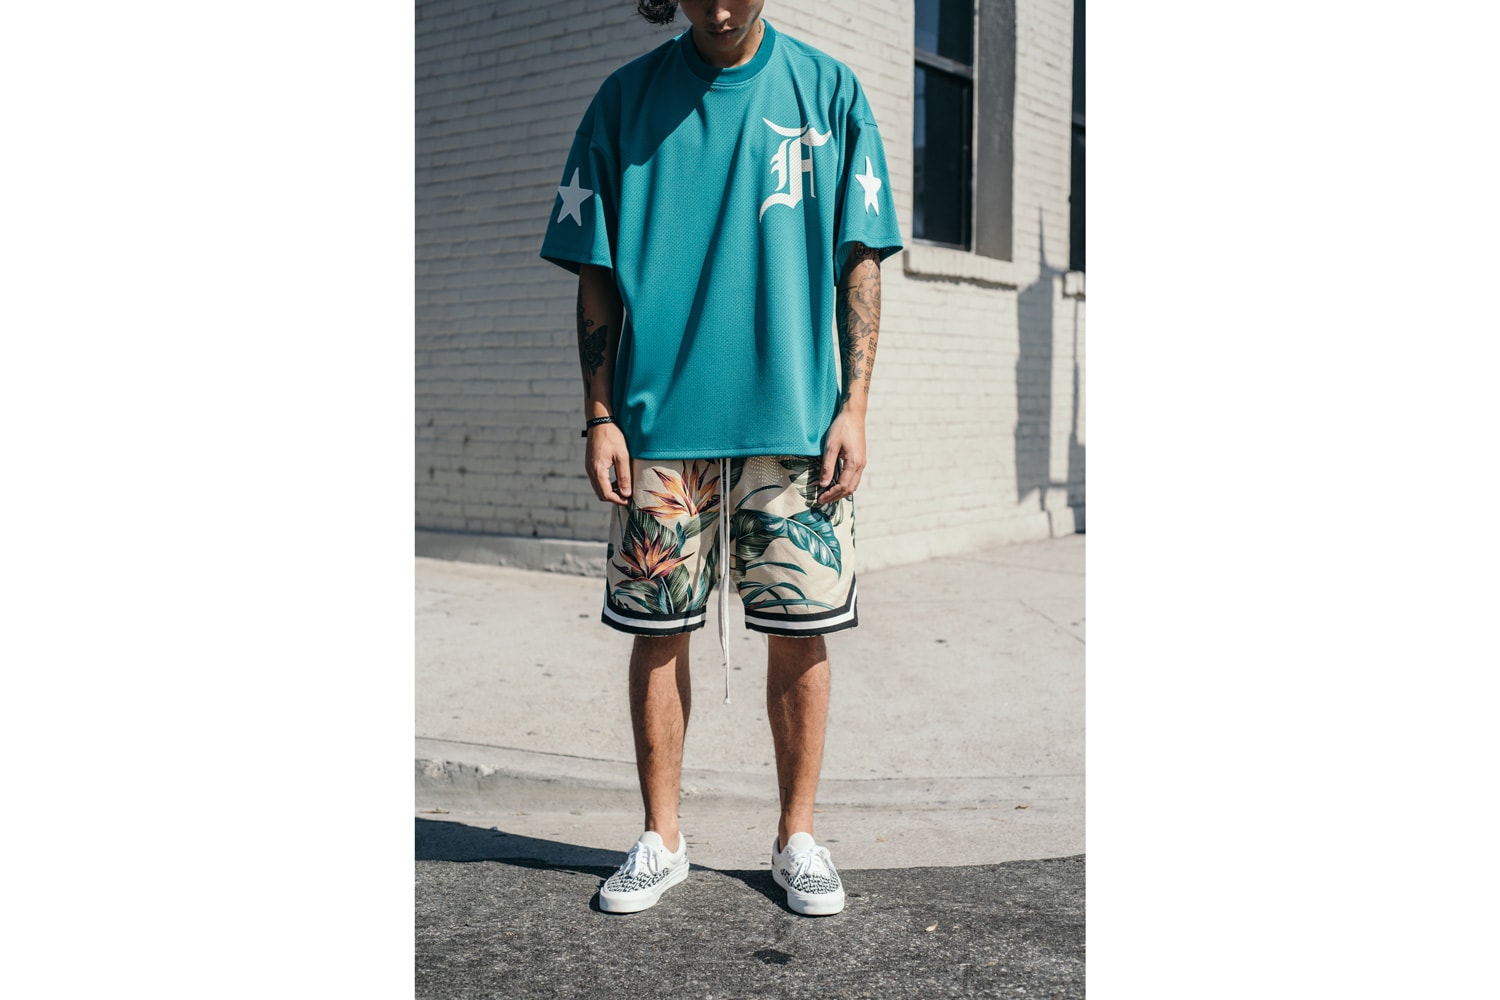 Jerry Lorenzo Fear of God 1997 Collection Teaser Instagram Varsity Jacket Fashion Apparel Clothing Miami Dolphins Accessories